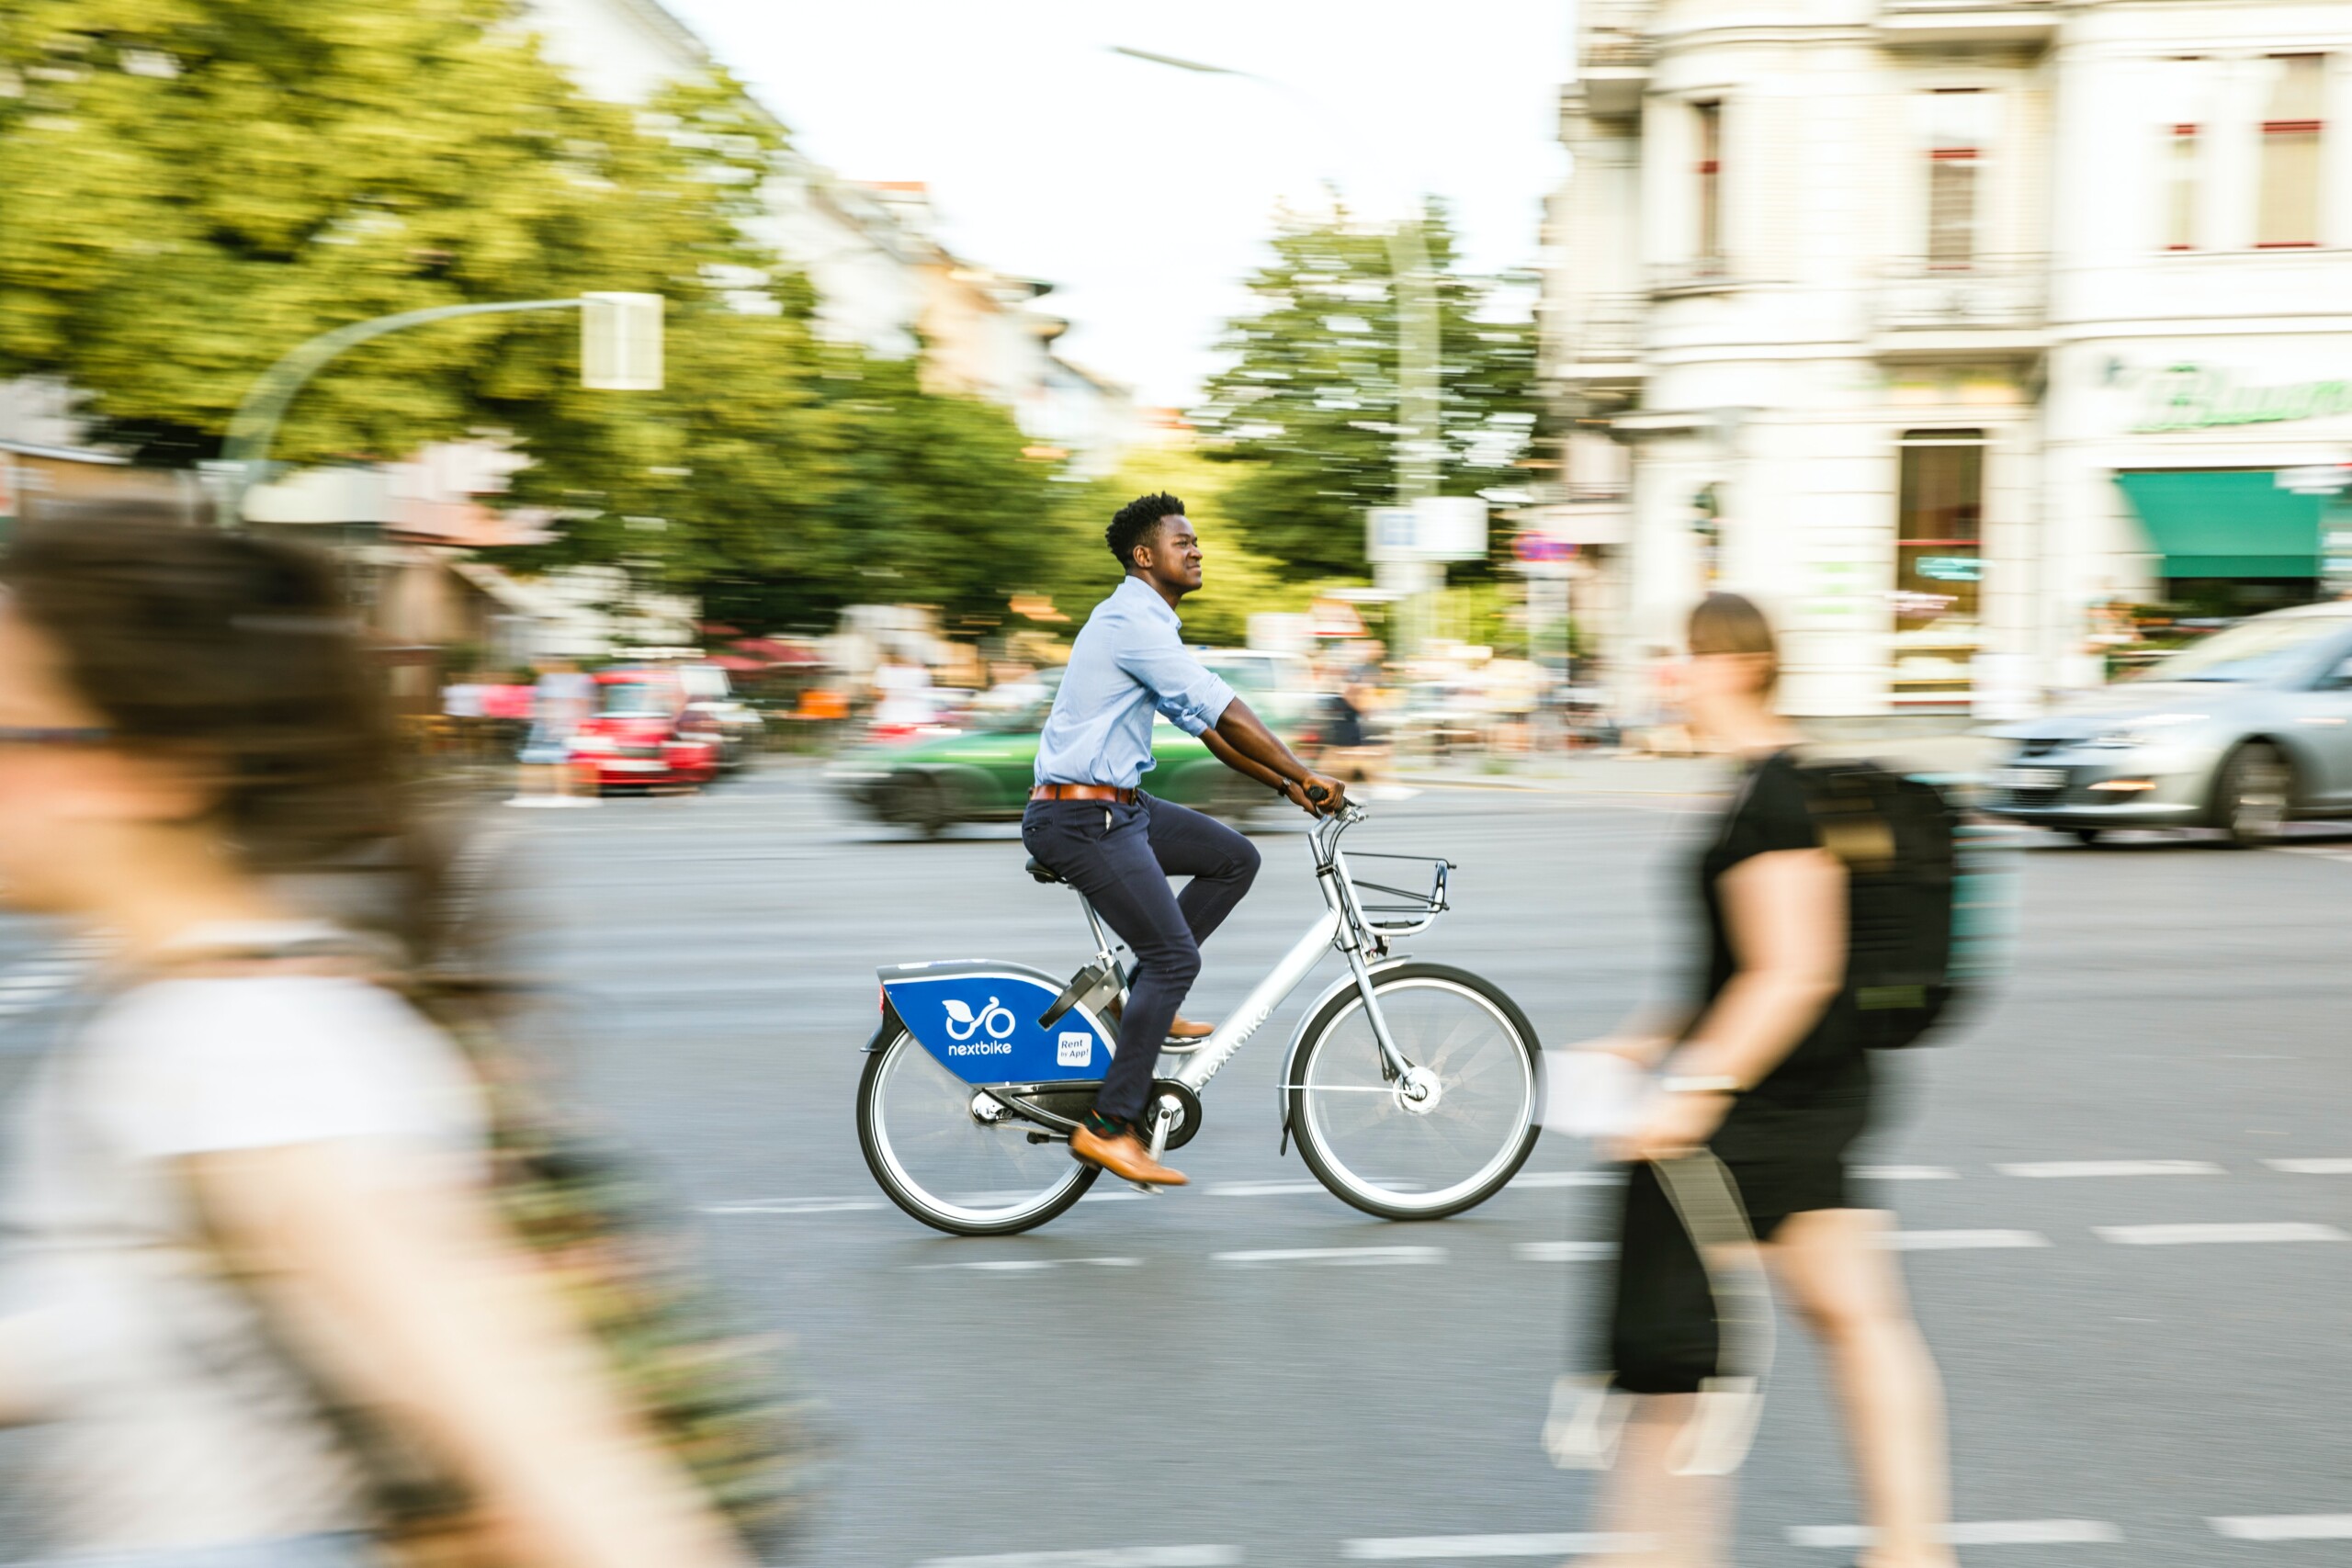 A cyclists in mixed traffic in an inner city